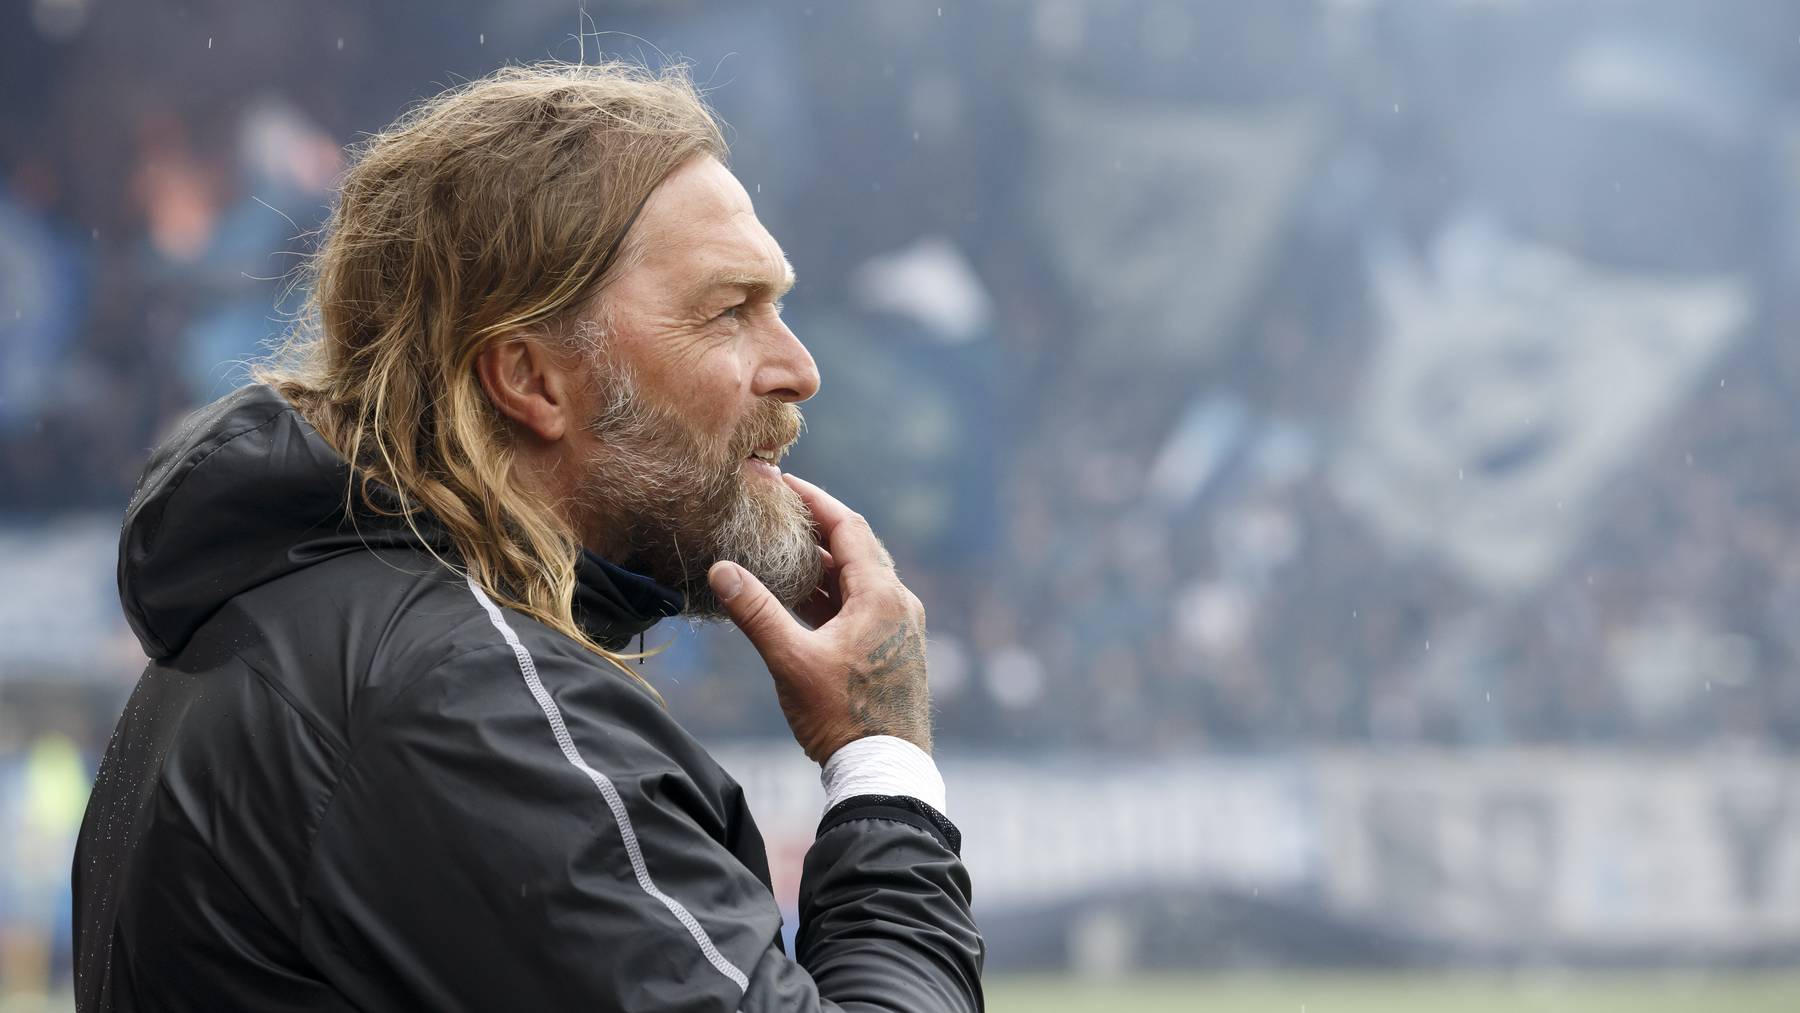 Rene van Eck, assistant coach of FC Zurich, looks his players, during the Super League soccer match of Swiss Championship between Neuchatel Xamax FCS and FC Zuerich, at the Stade de la Maladiere stadium, in Neuchatel, Switzerland, Saturday, May 11, 2019.